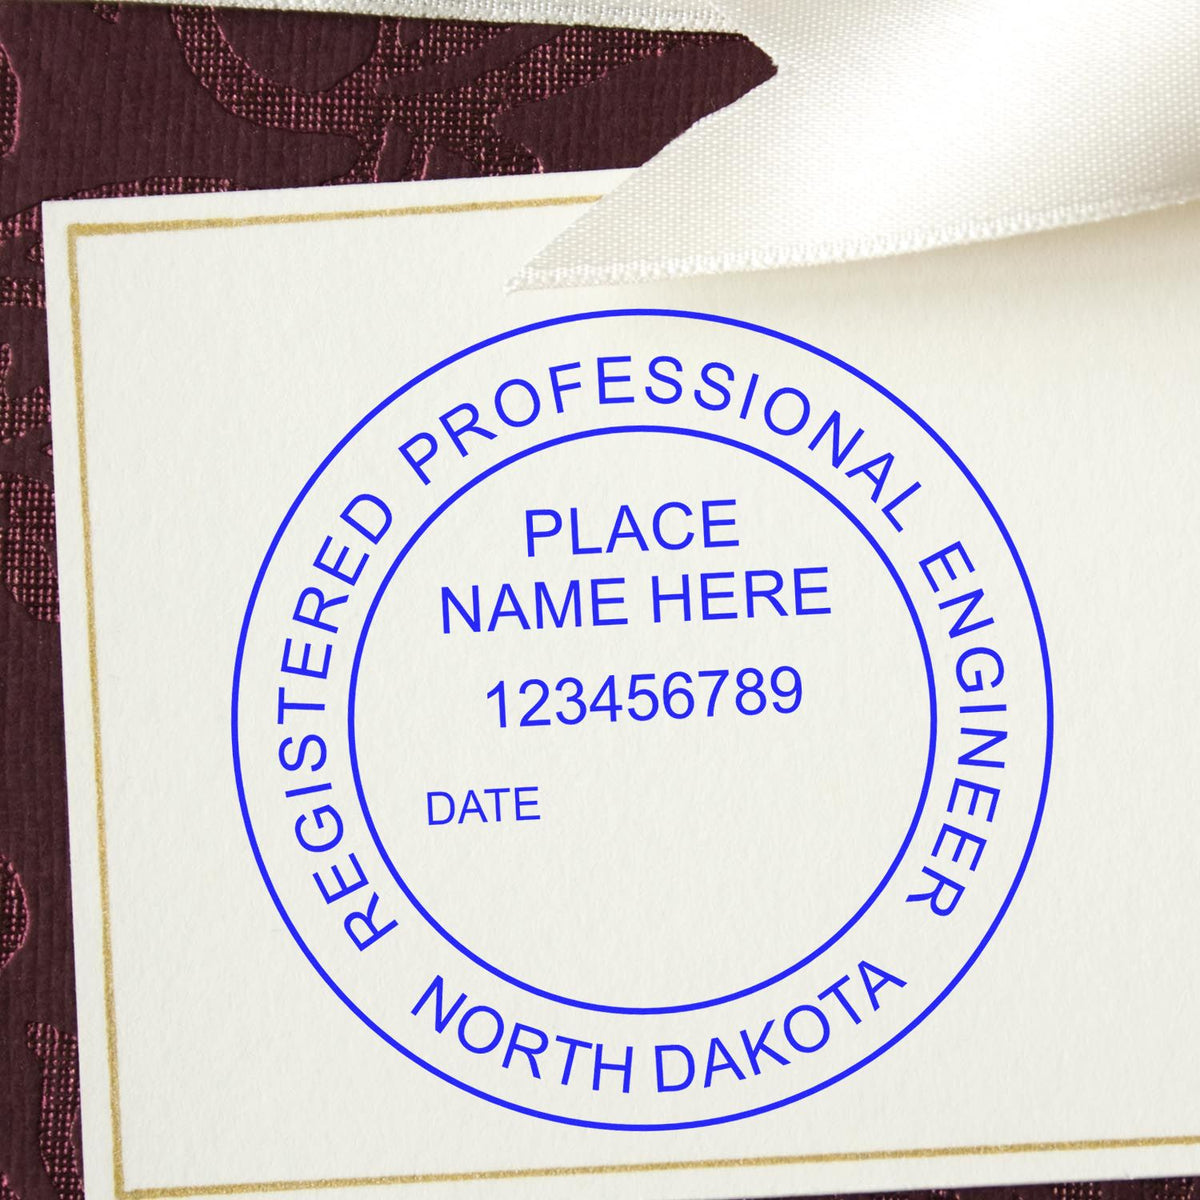 The Self-Inking North Dakota PE Stamp stamp impression comes to life with a crisp, detailed photo on paper - showcasing true professional quality.